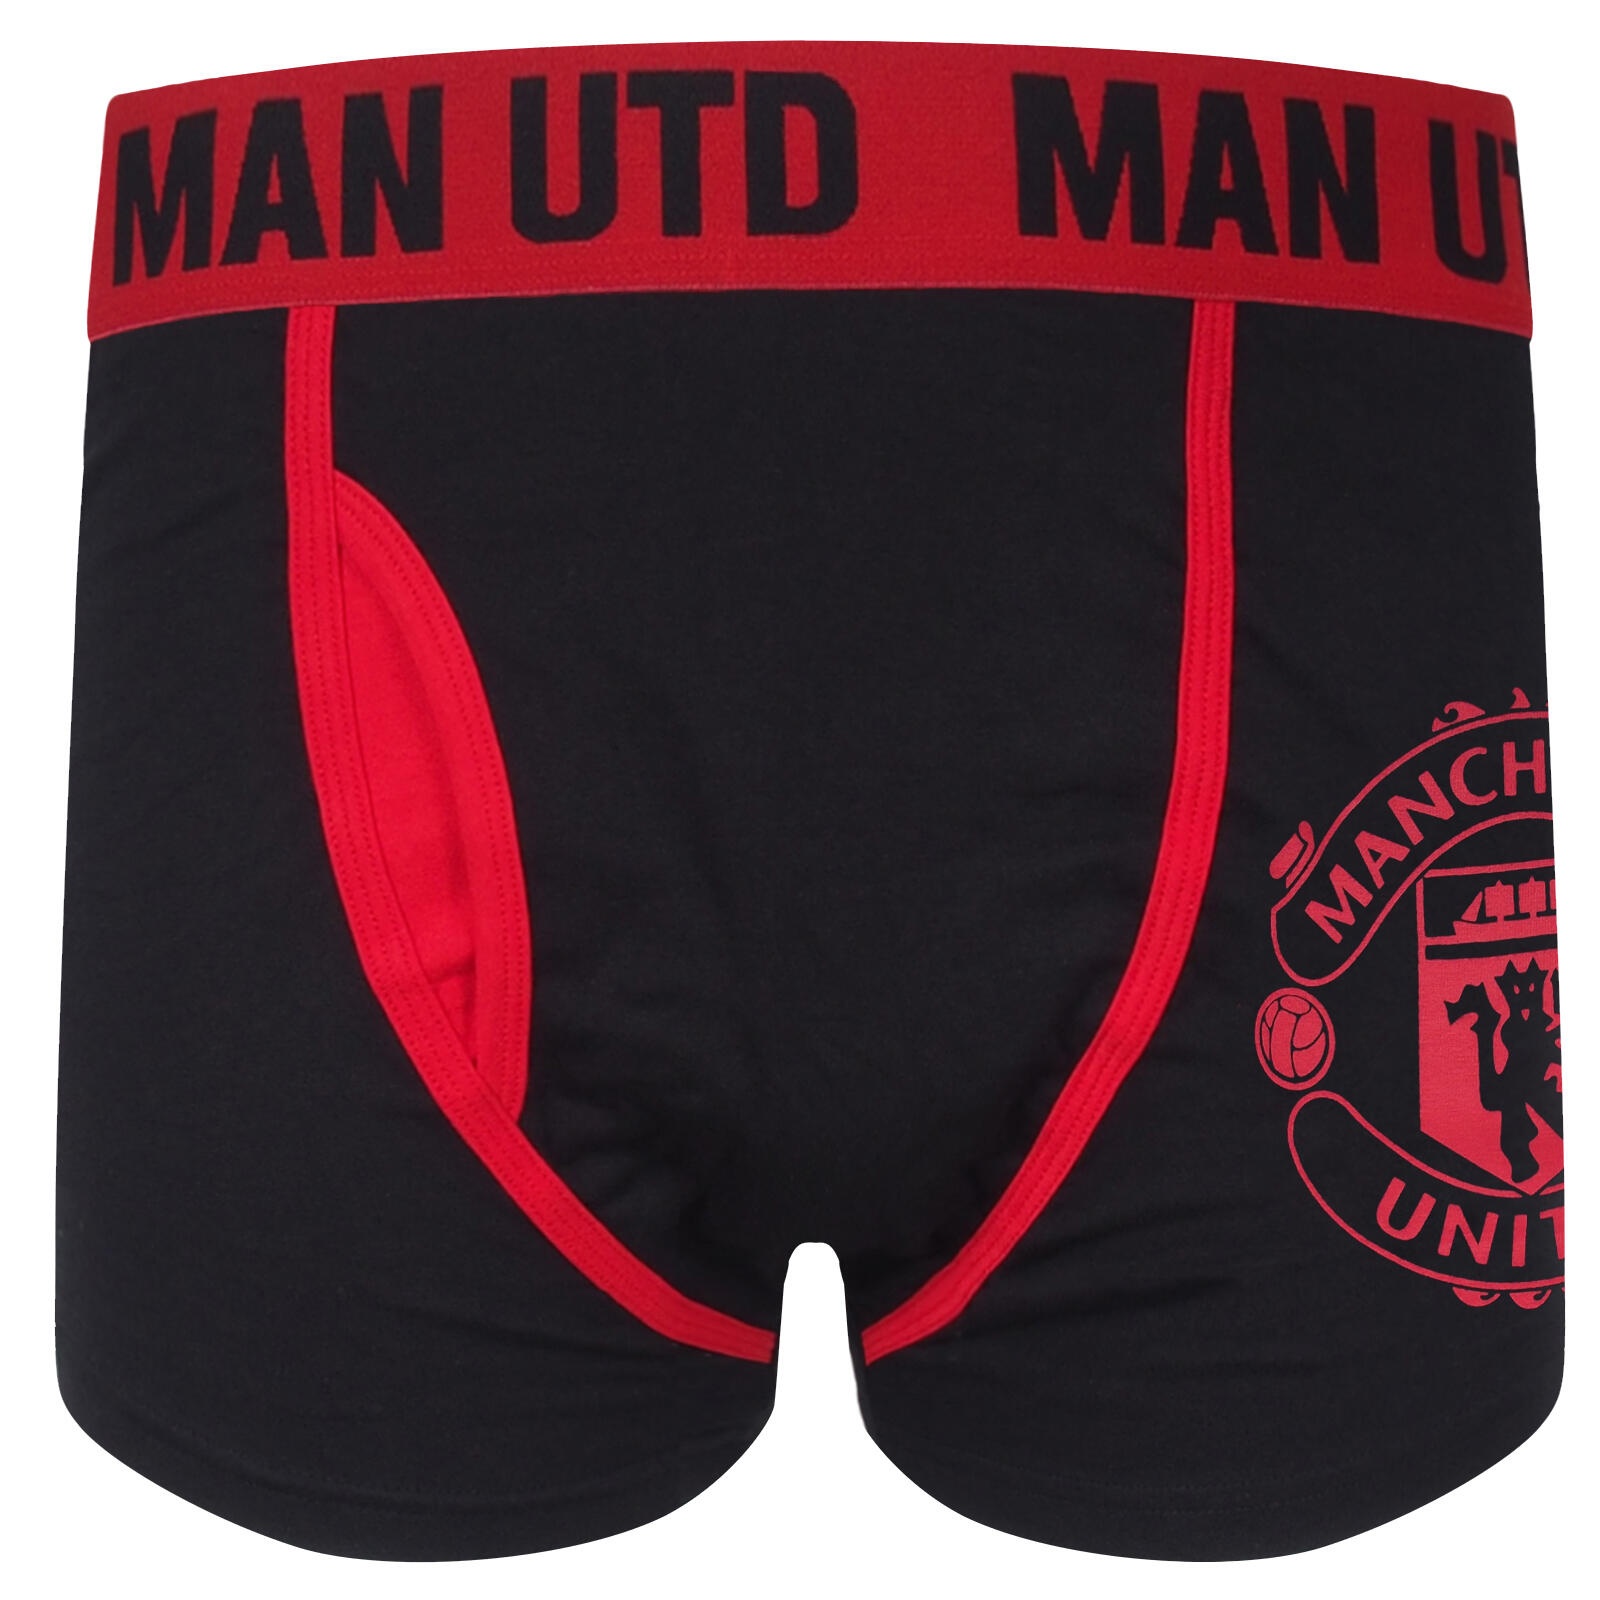 MANCHESTER UNITED Manchester United Mens Boxer Shorts Premium Crest OFFICIAL Football Gift